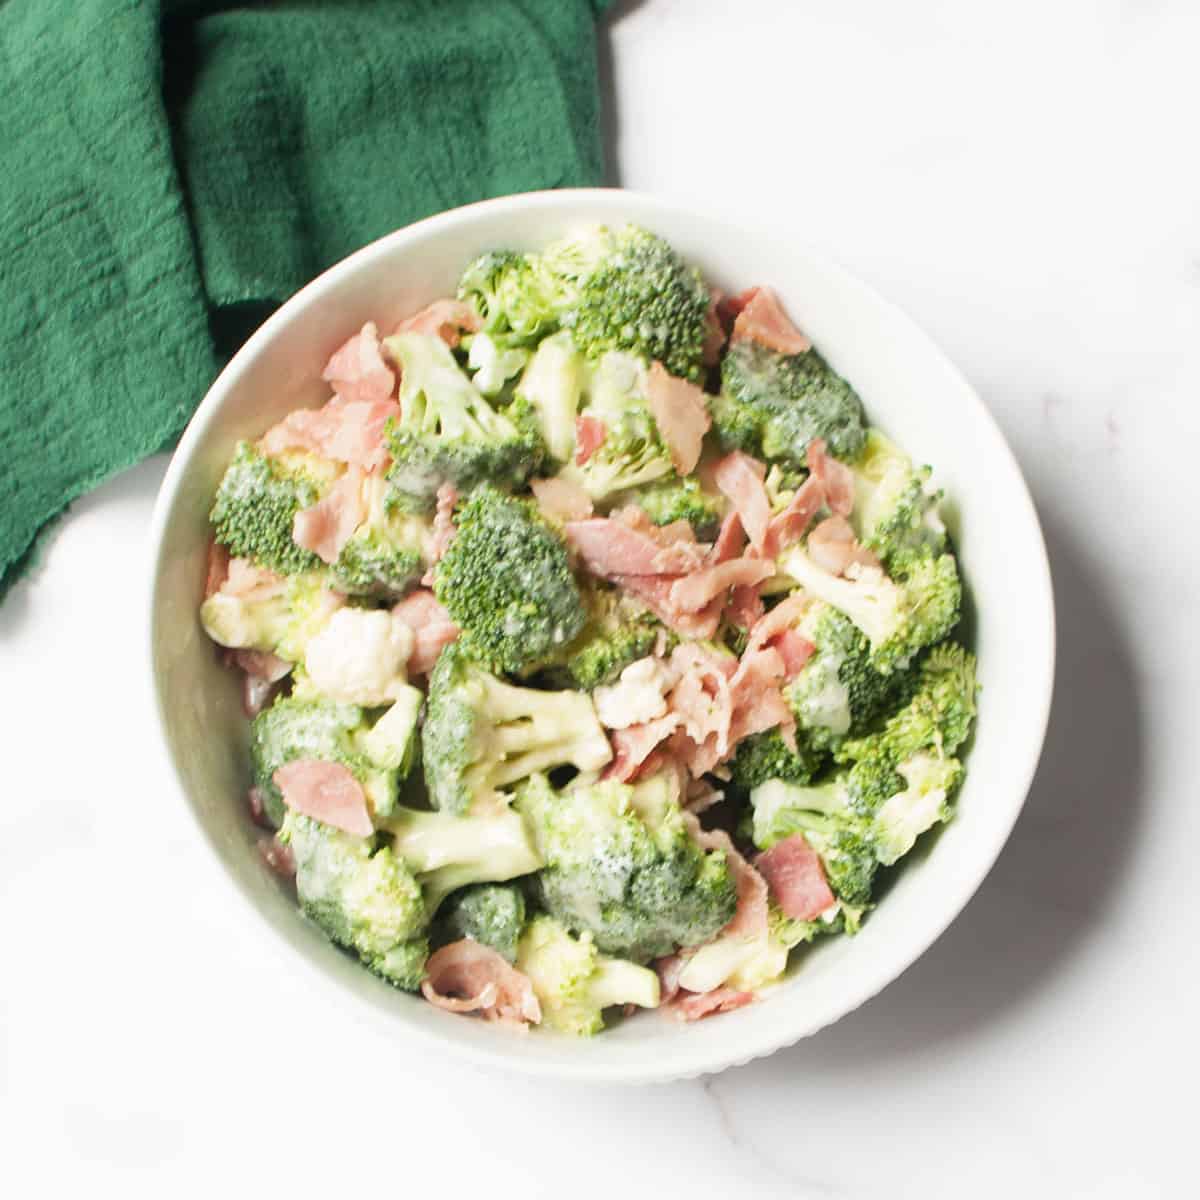 Amish Broccoli and Cauliflower Salad in a white bowl with a green linen.